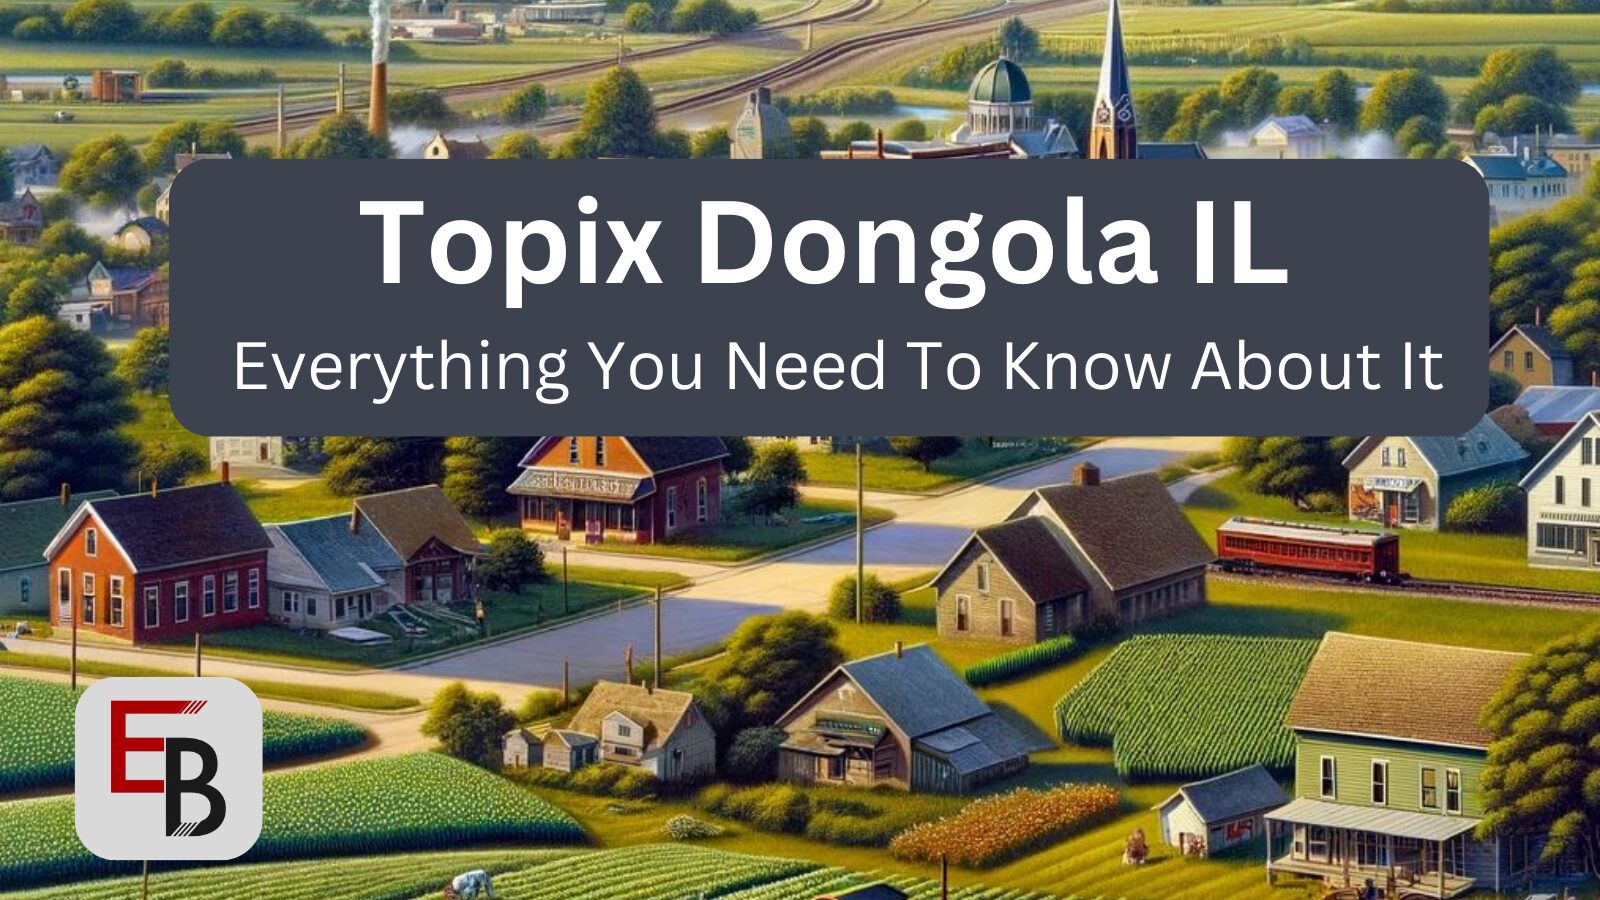 What is Topix Dongola IL?